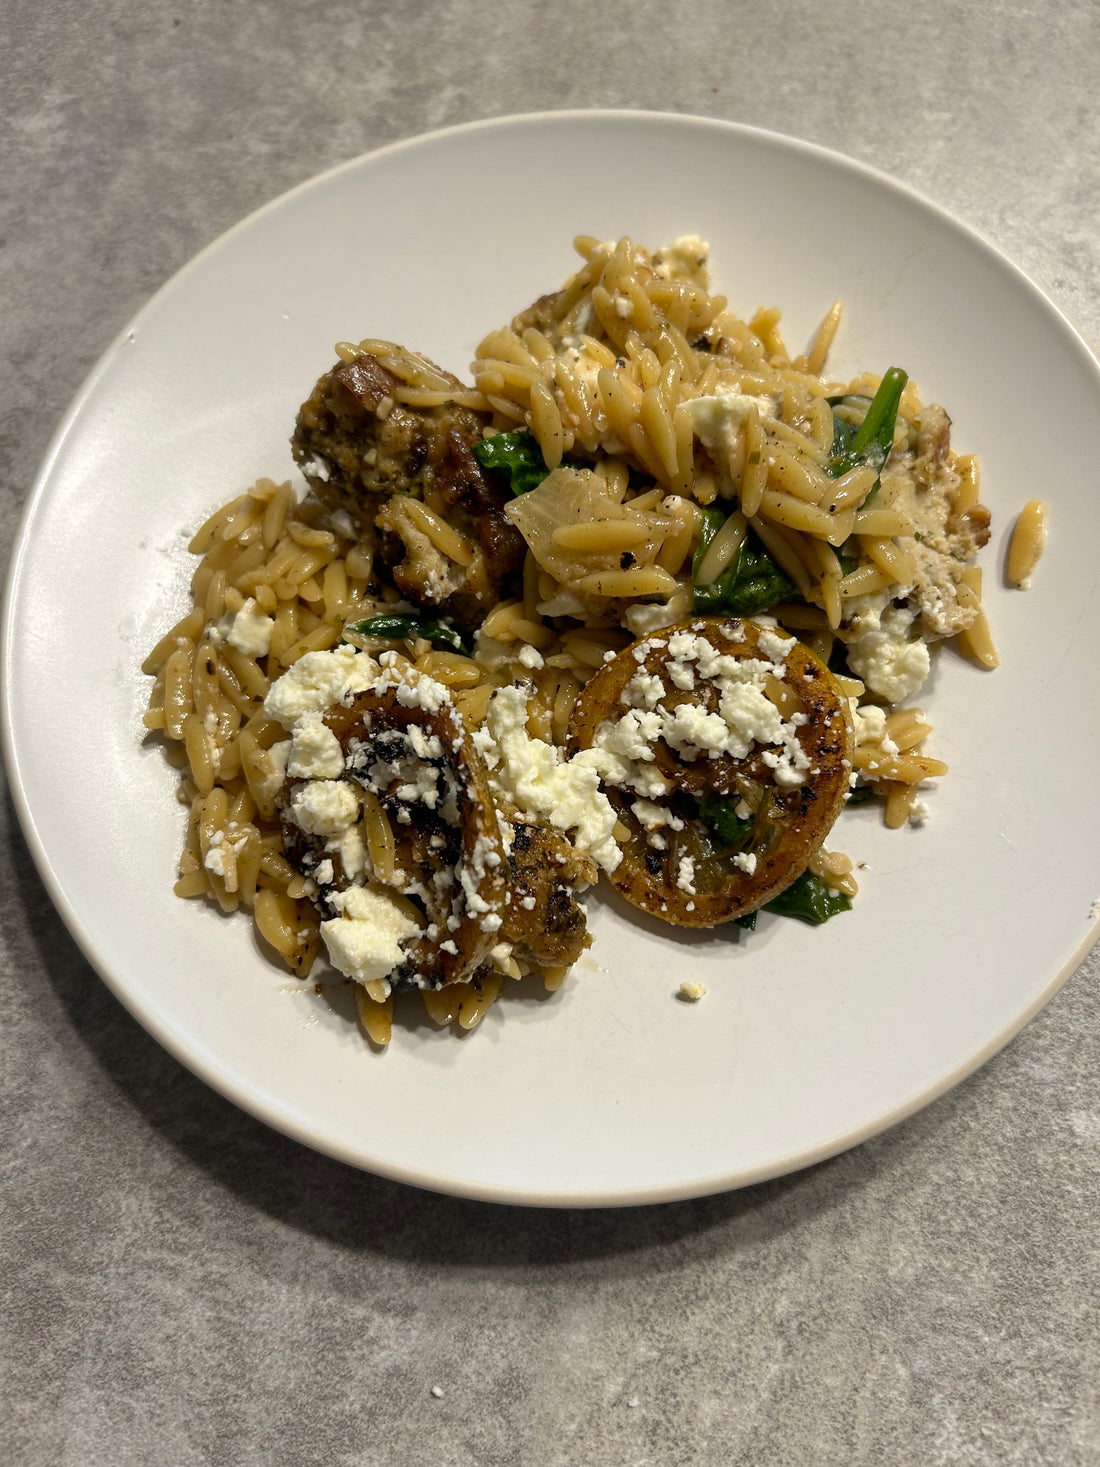 Delicious Smoked Maple Chicken Meatballs with Orzo and Spinach